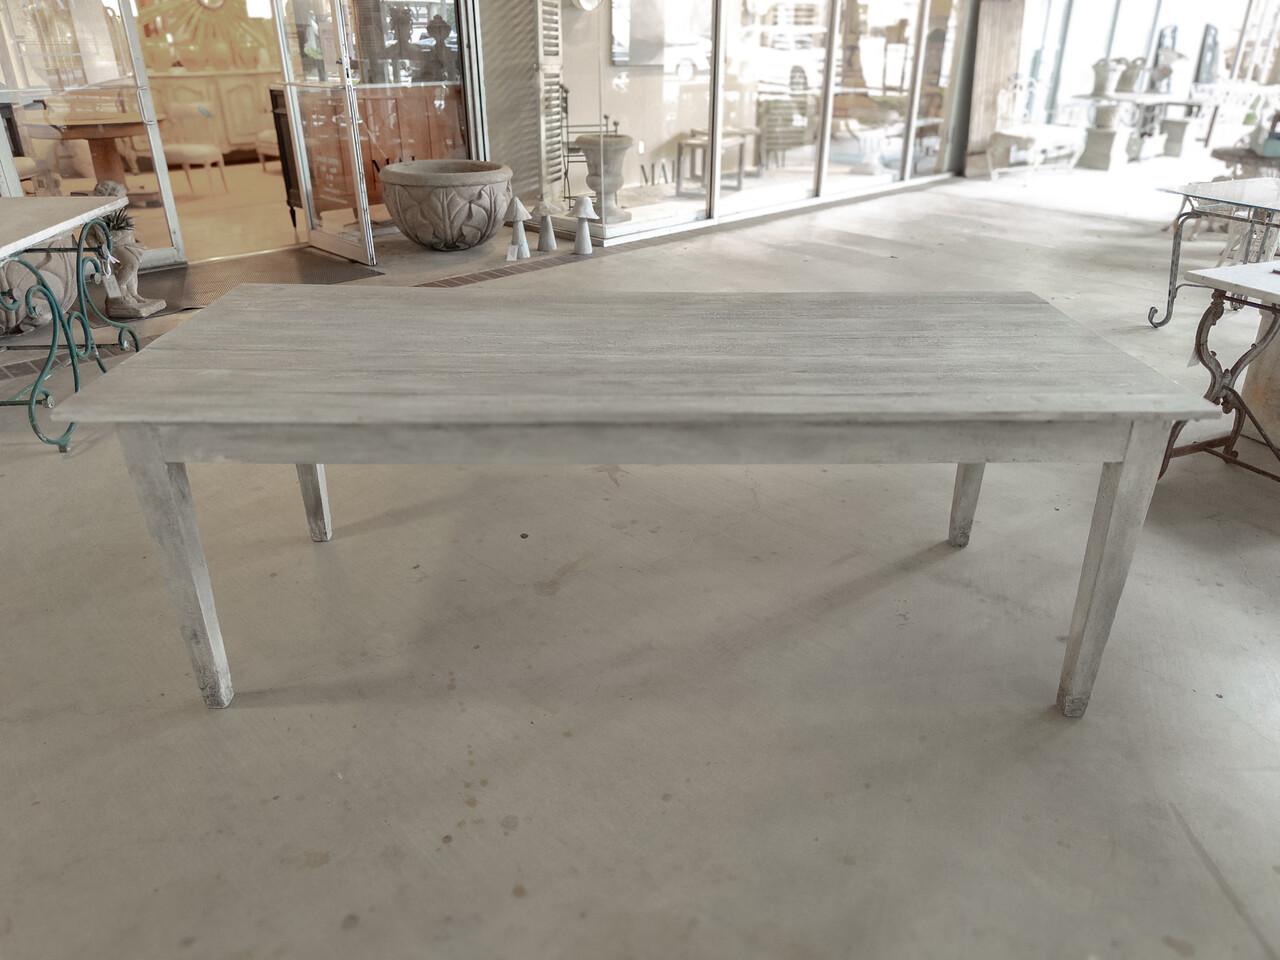 The custom-made Plank Top Farm Table is a rustic masterpiece that marries functionality and artisanal craftsmanship. Its design exudes a warm, inviting charm that harkens back to the simplicity and comfort of farmhouse living.

The tabletop is a